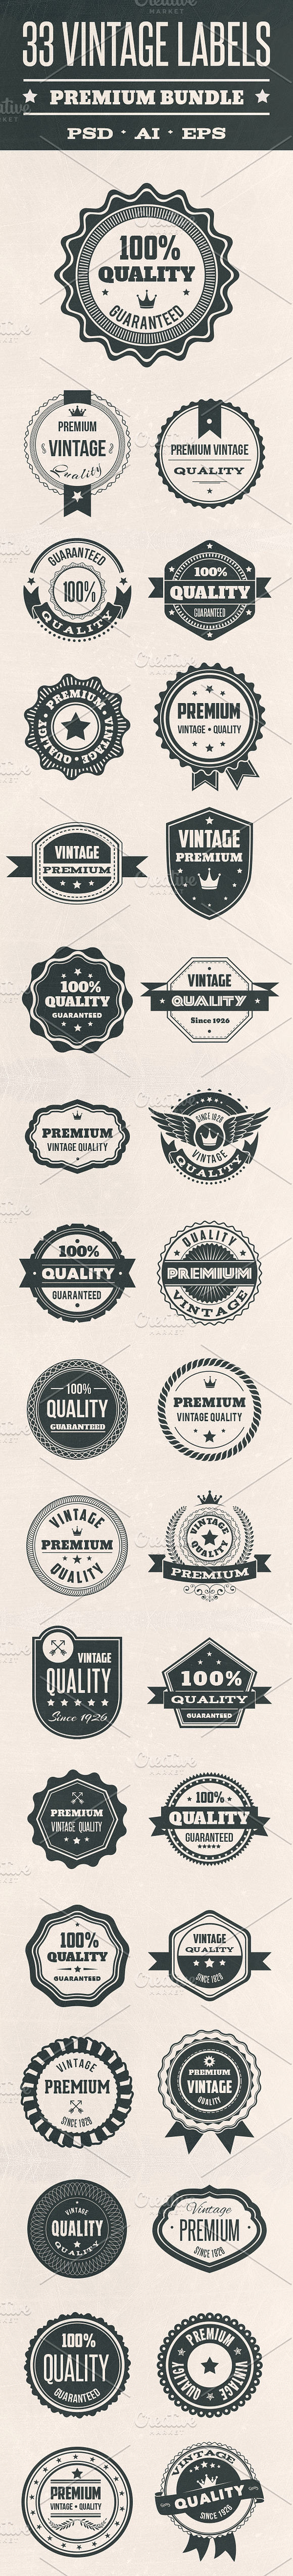 33 VINTAGE LABELS in Logo Templates - product preview 1